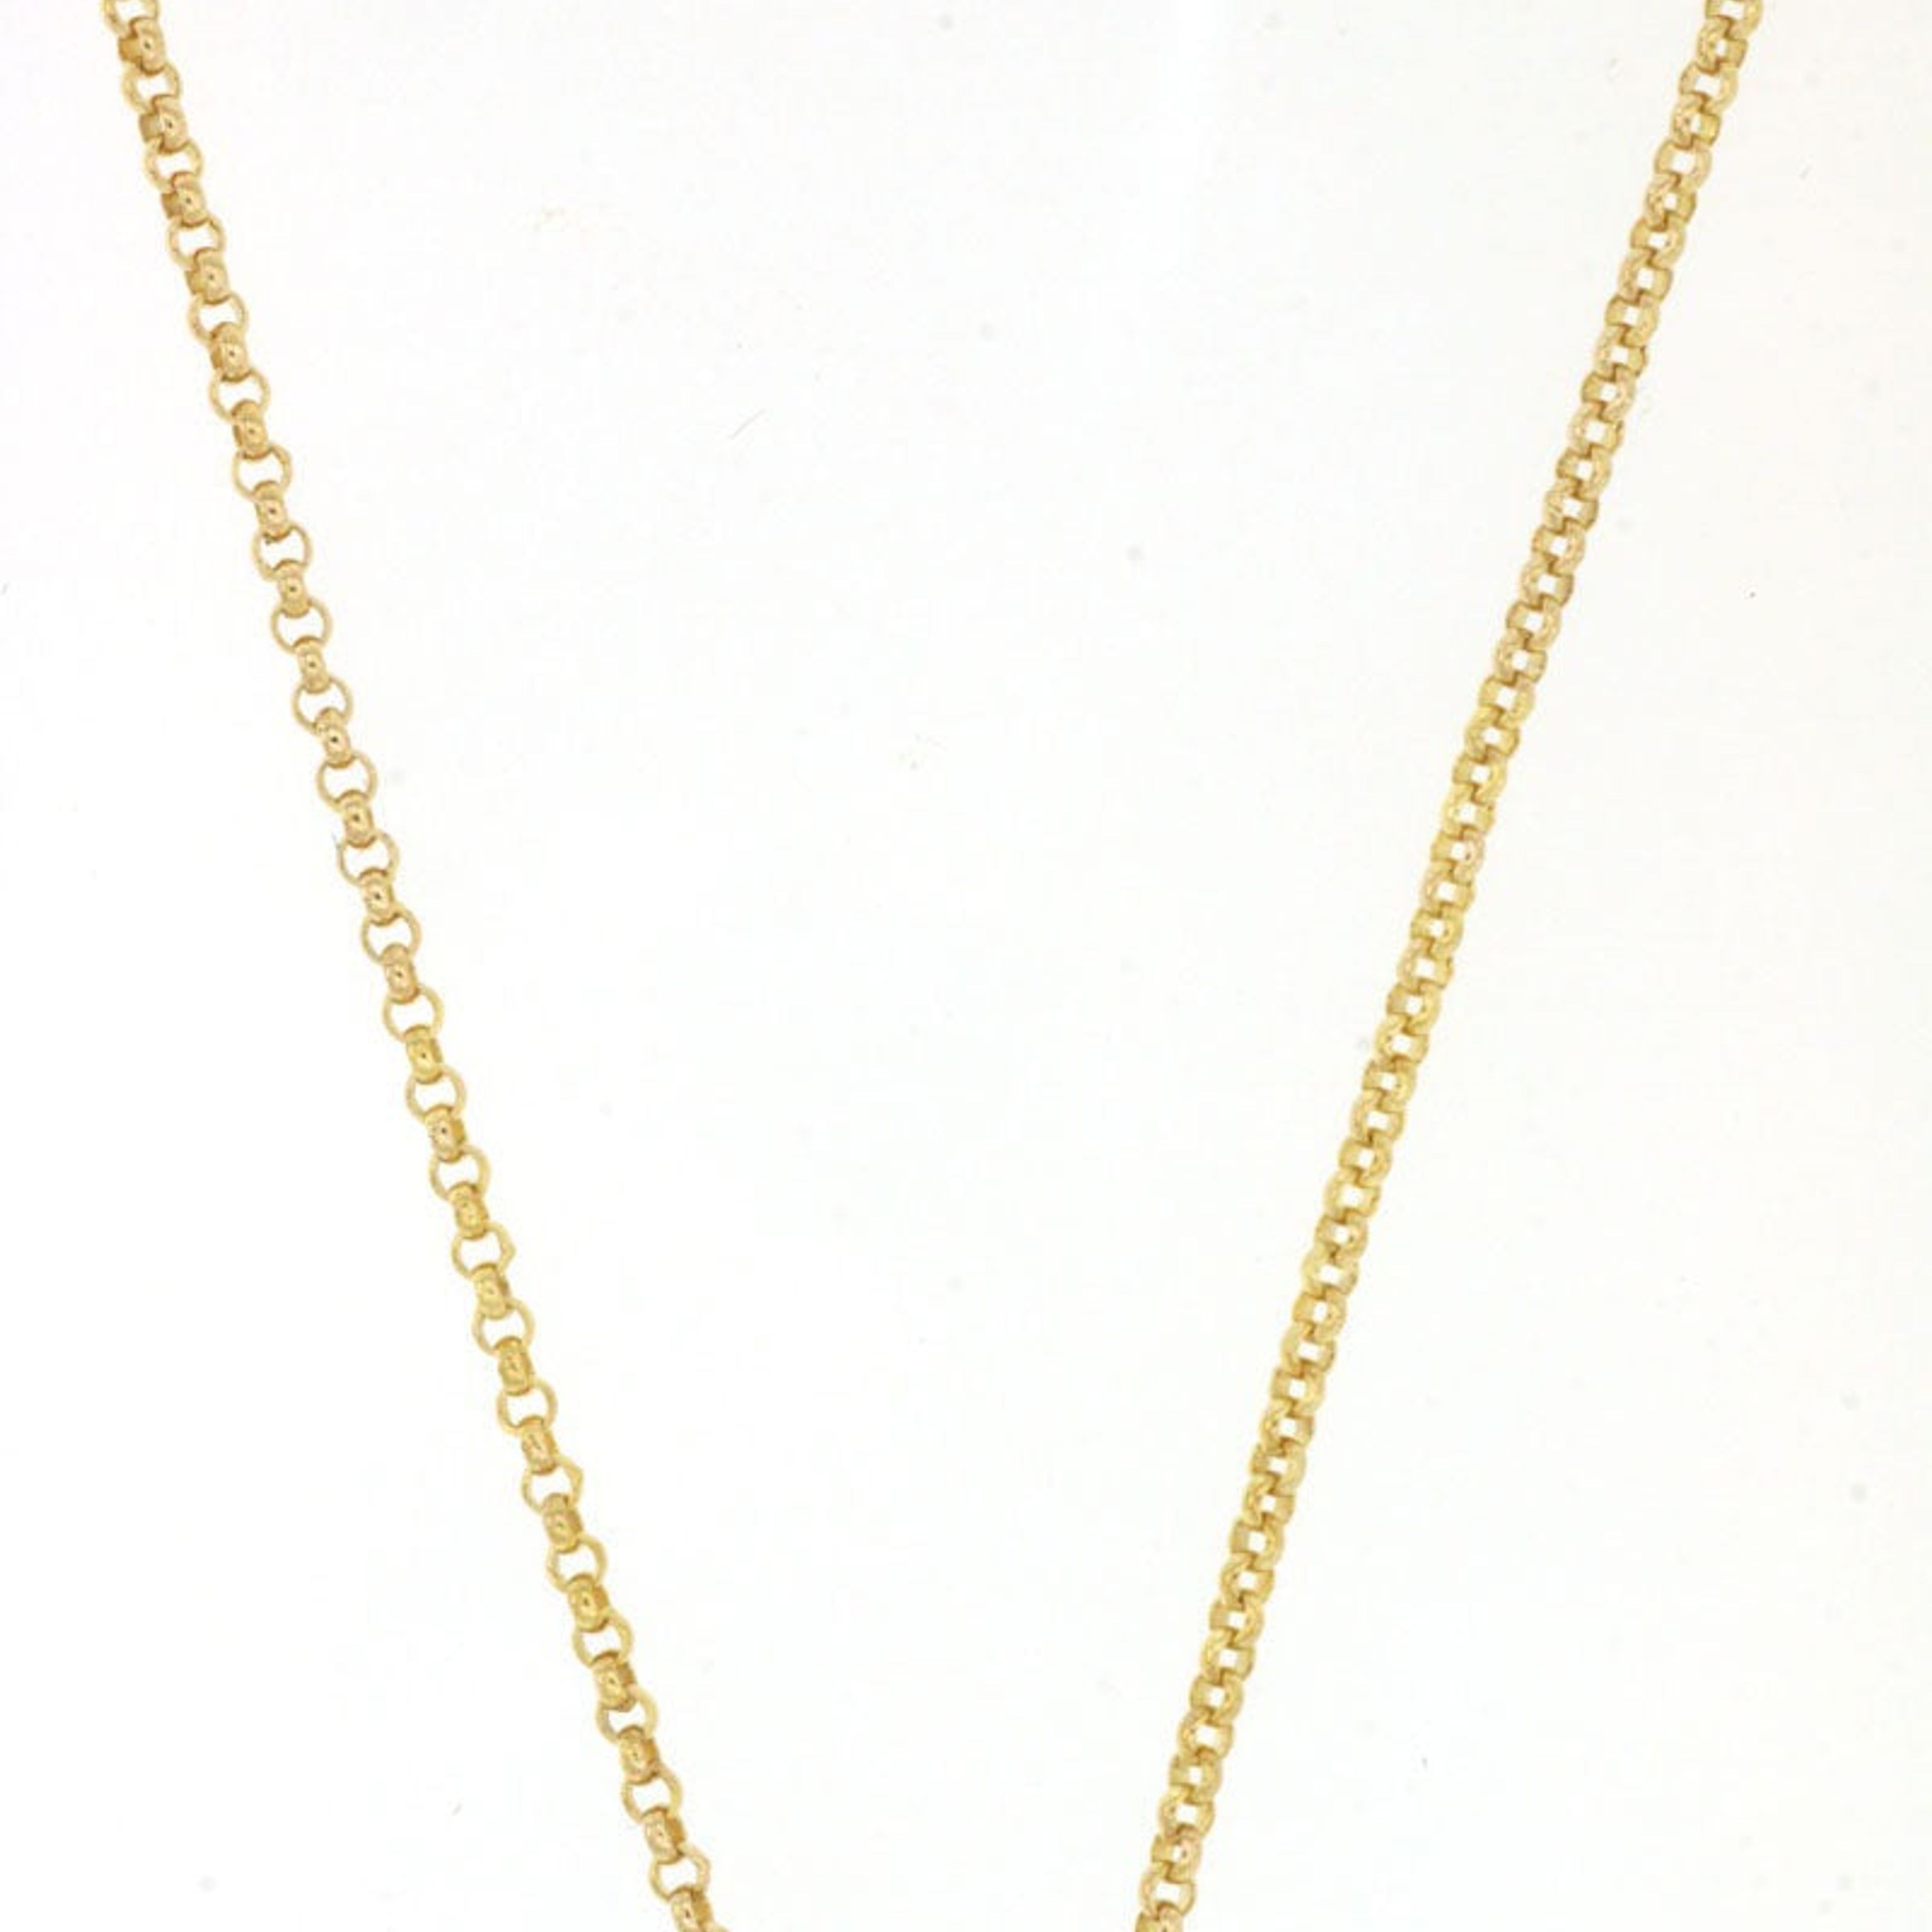 Diamond Star Necklace in 14K Yellow Gold